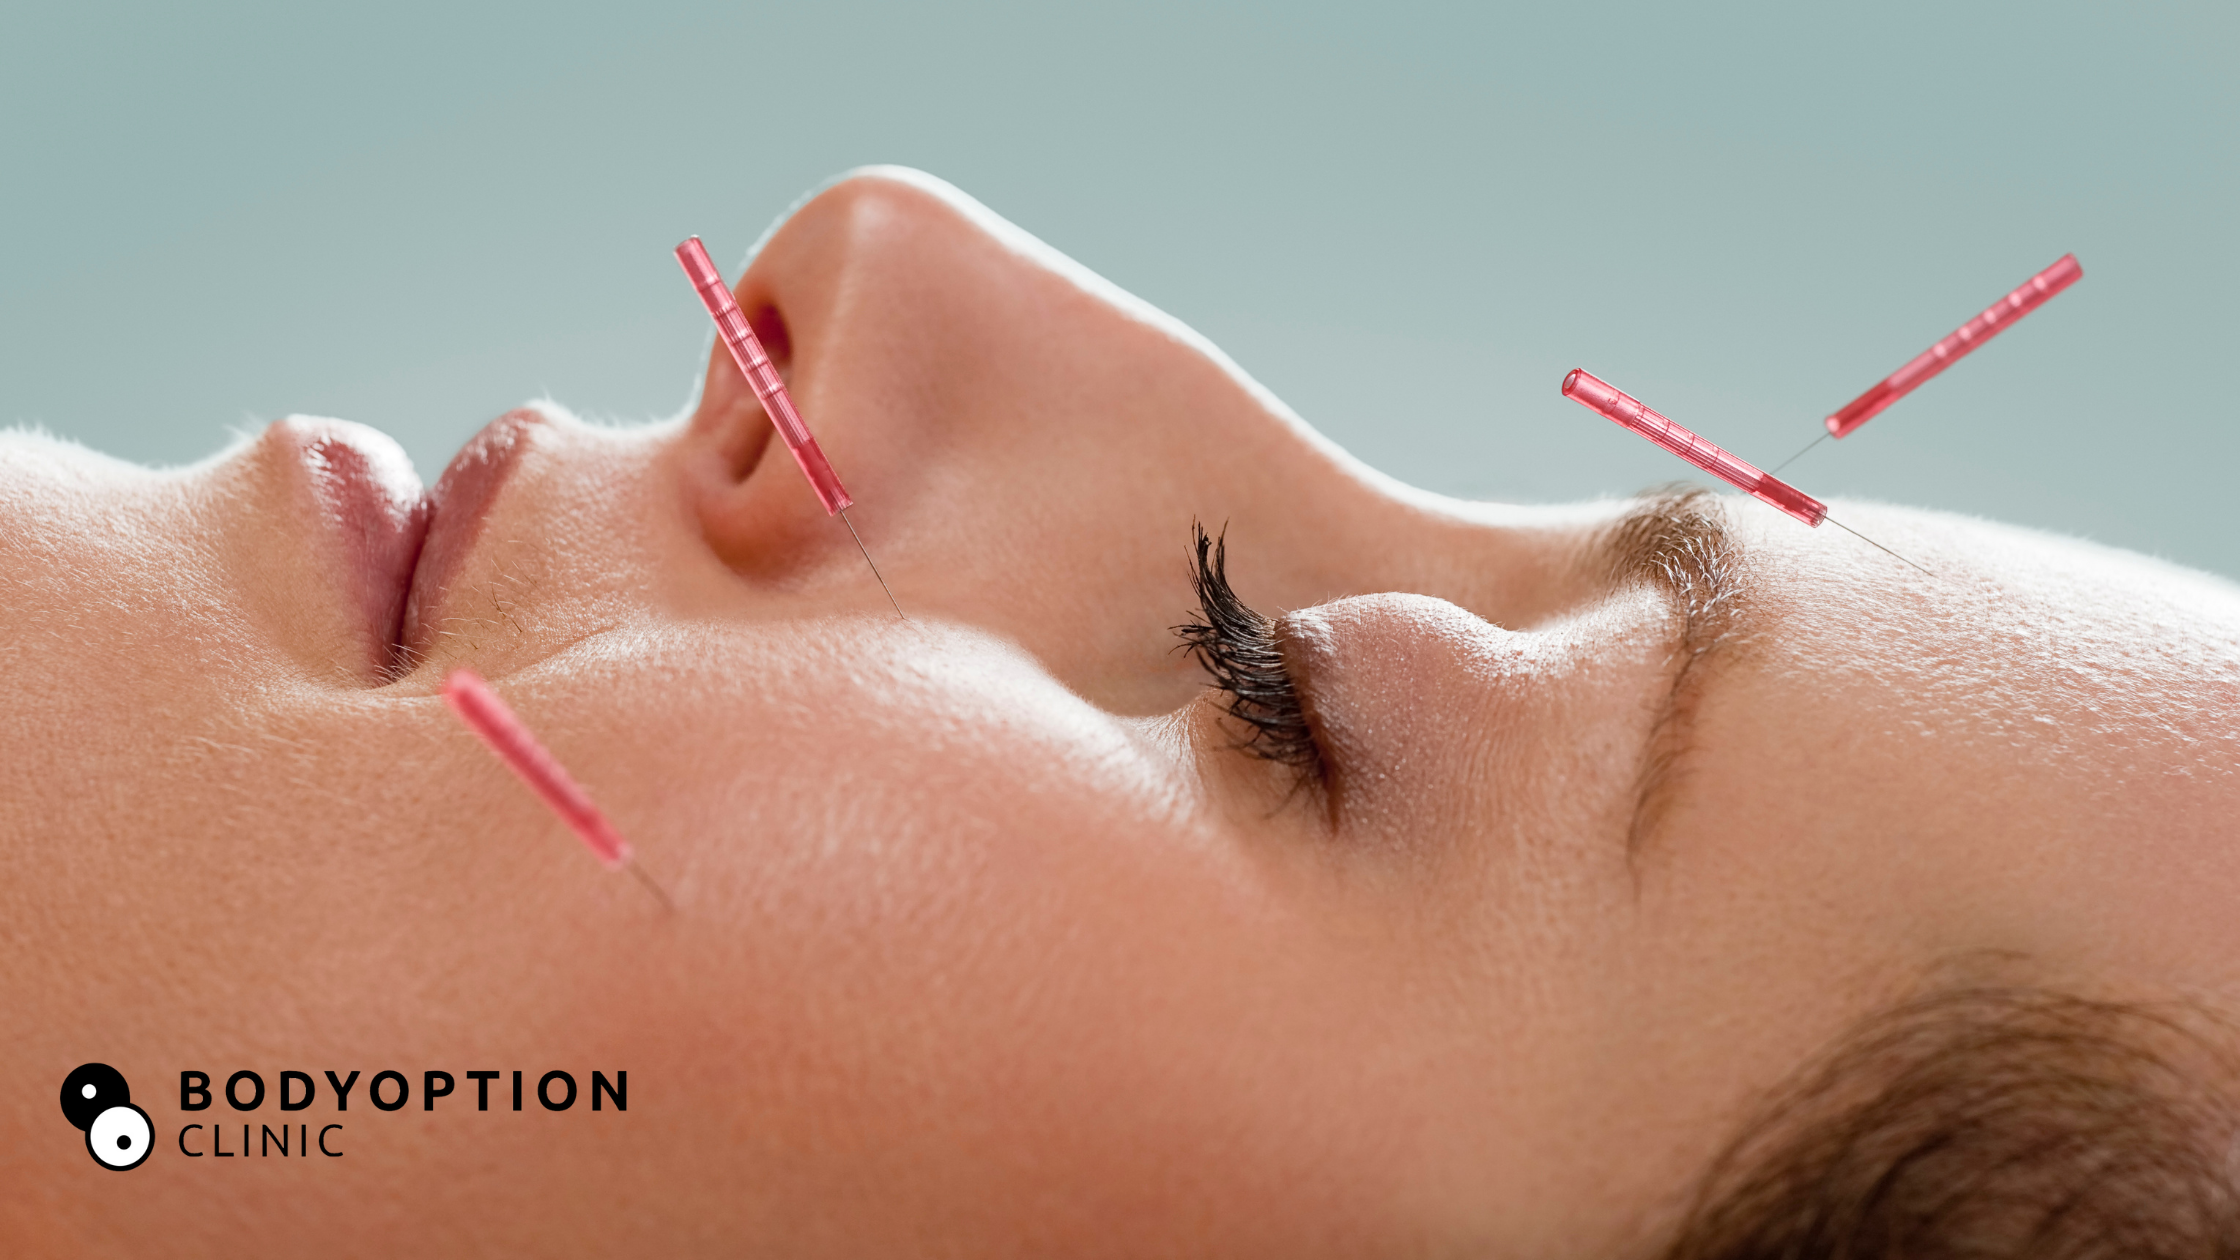 Facial Acupuncture: What Is It and Is It Safe?